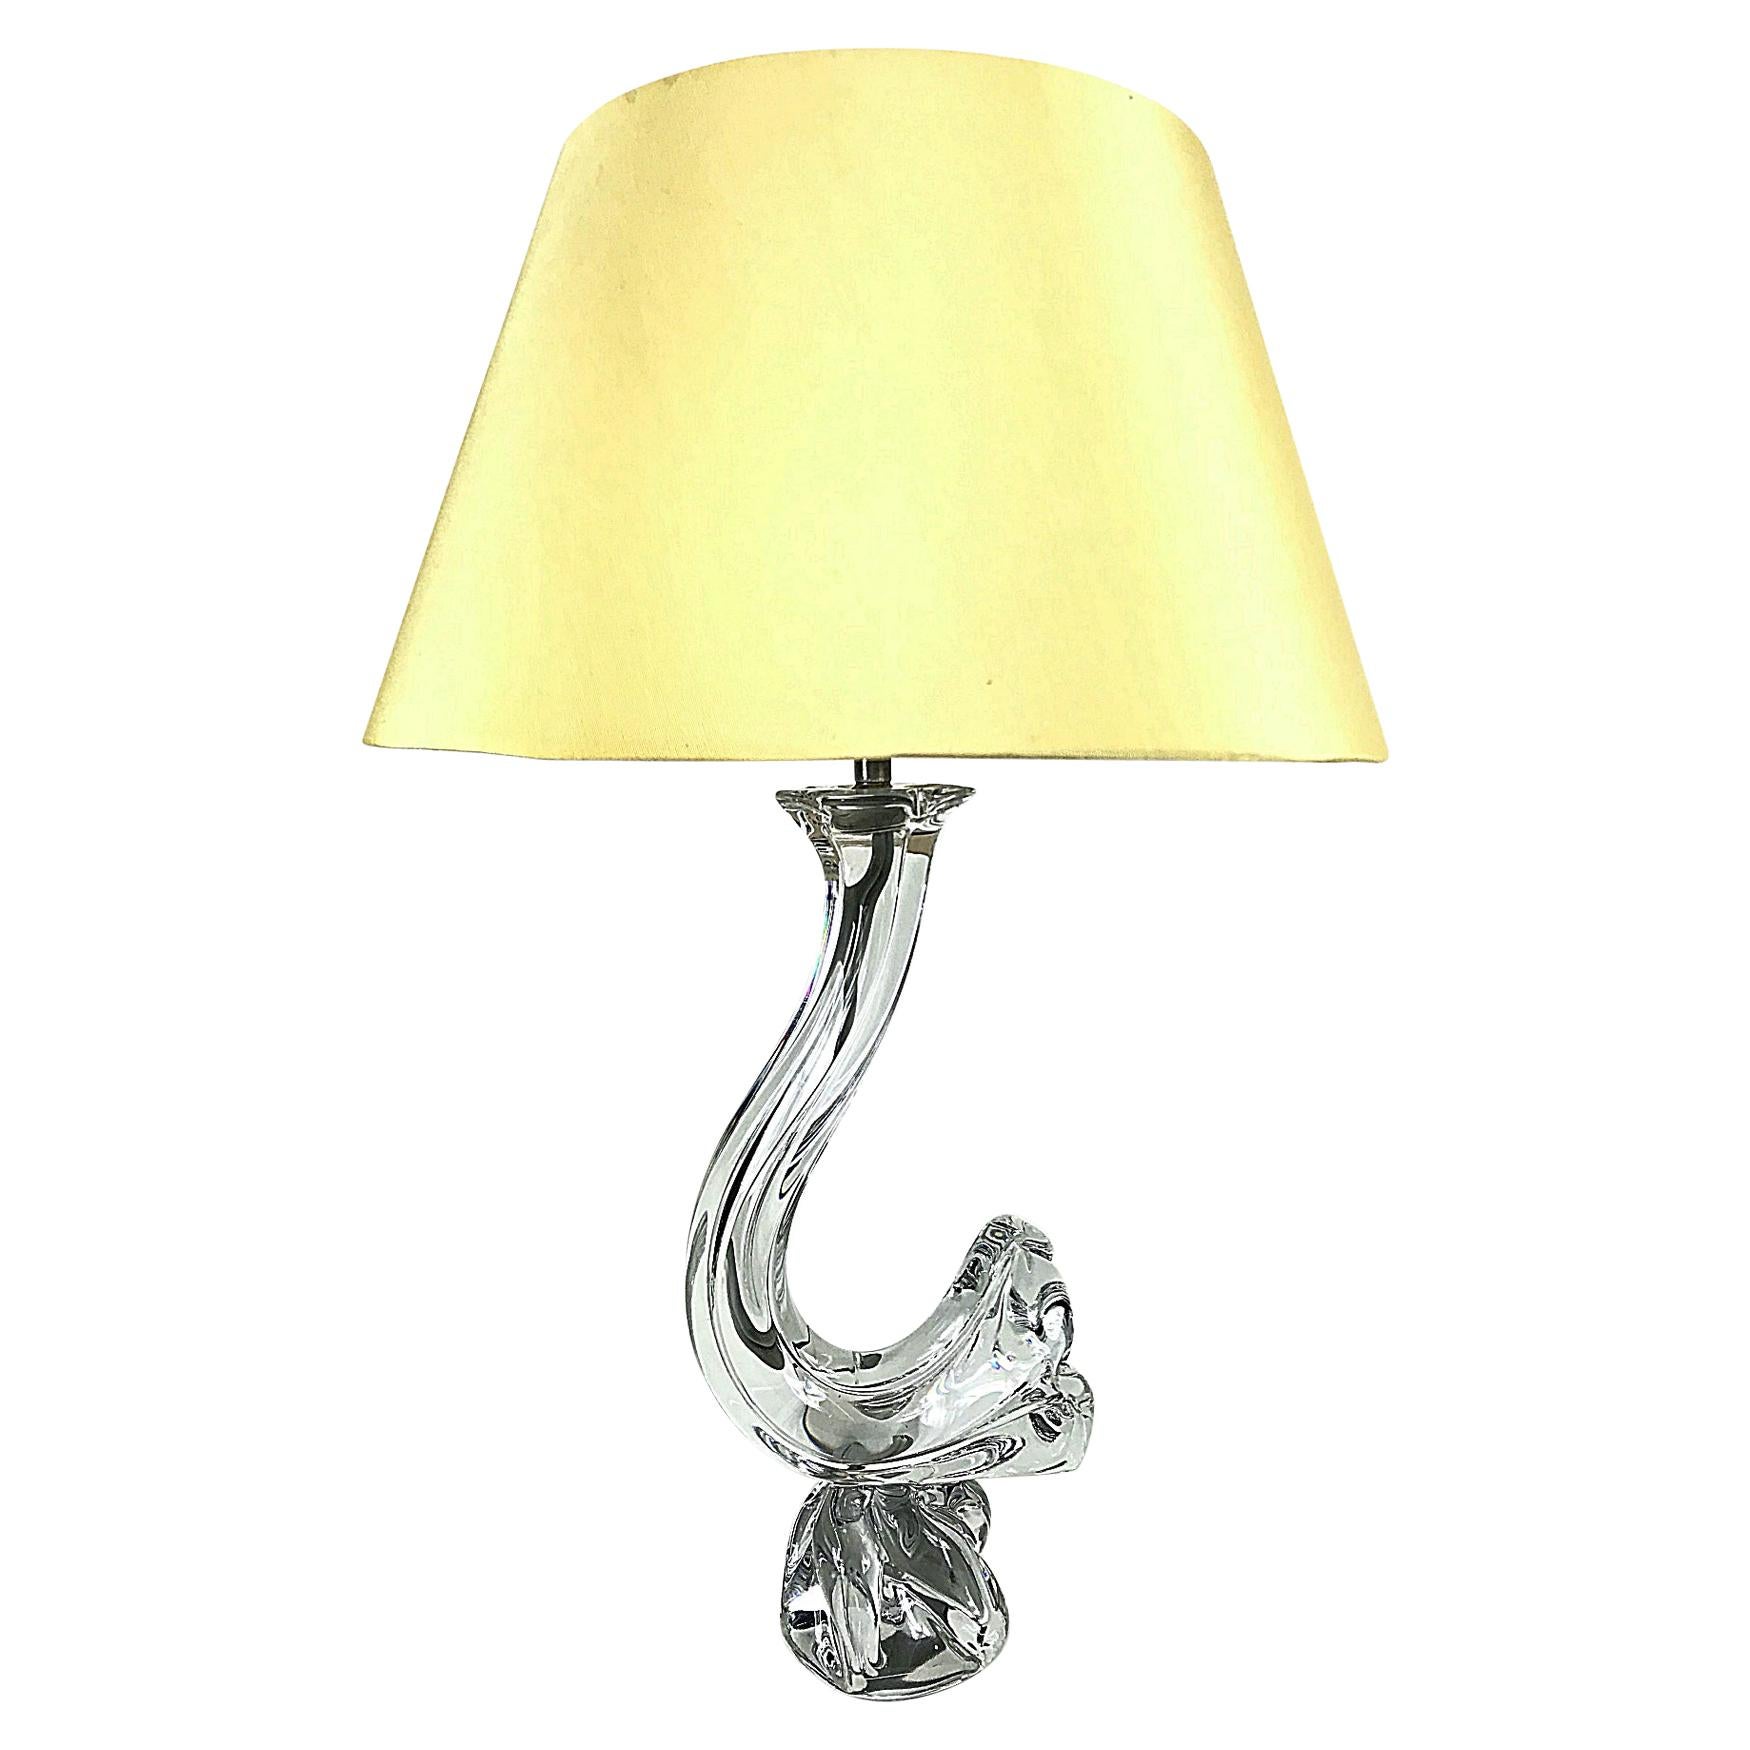 Large Midcentury Daum Nancy Art Crystal Glass Table Lamp, 1950s, France For Sale